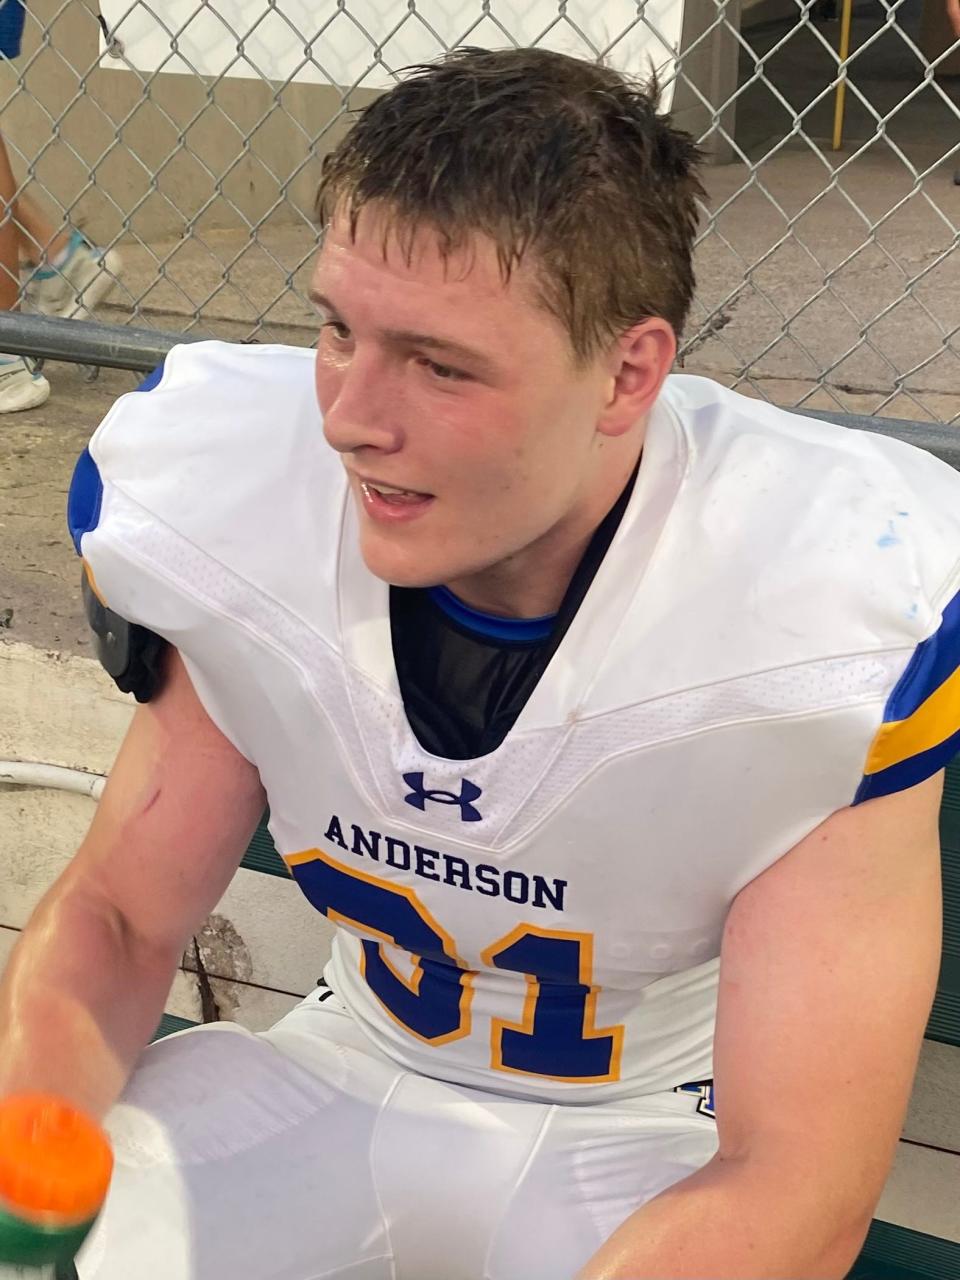 In his first game on defense, Anderson junior Jack Middleton was all over the field during a 42-0 victory over McCallum on Thursday. He had 19 tackles, seven behind the line of scrimmage. He played on the offensive line last year